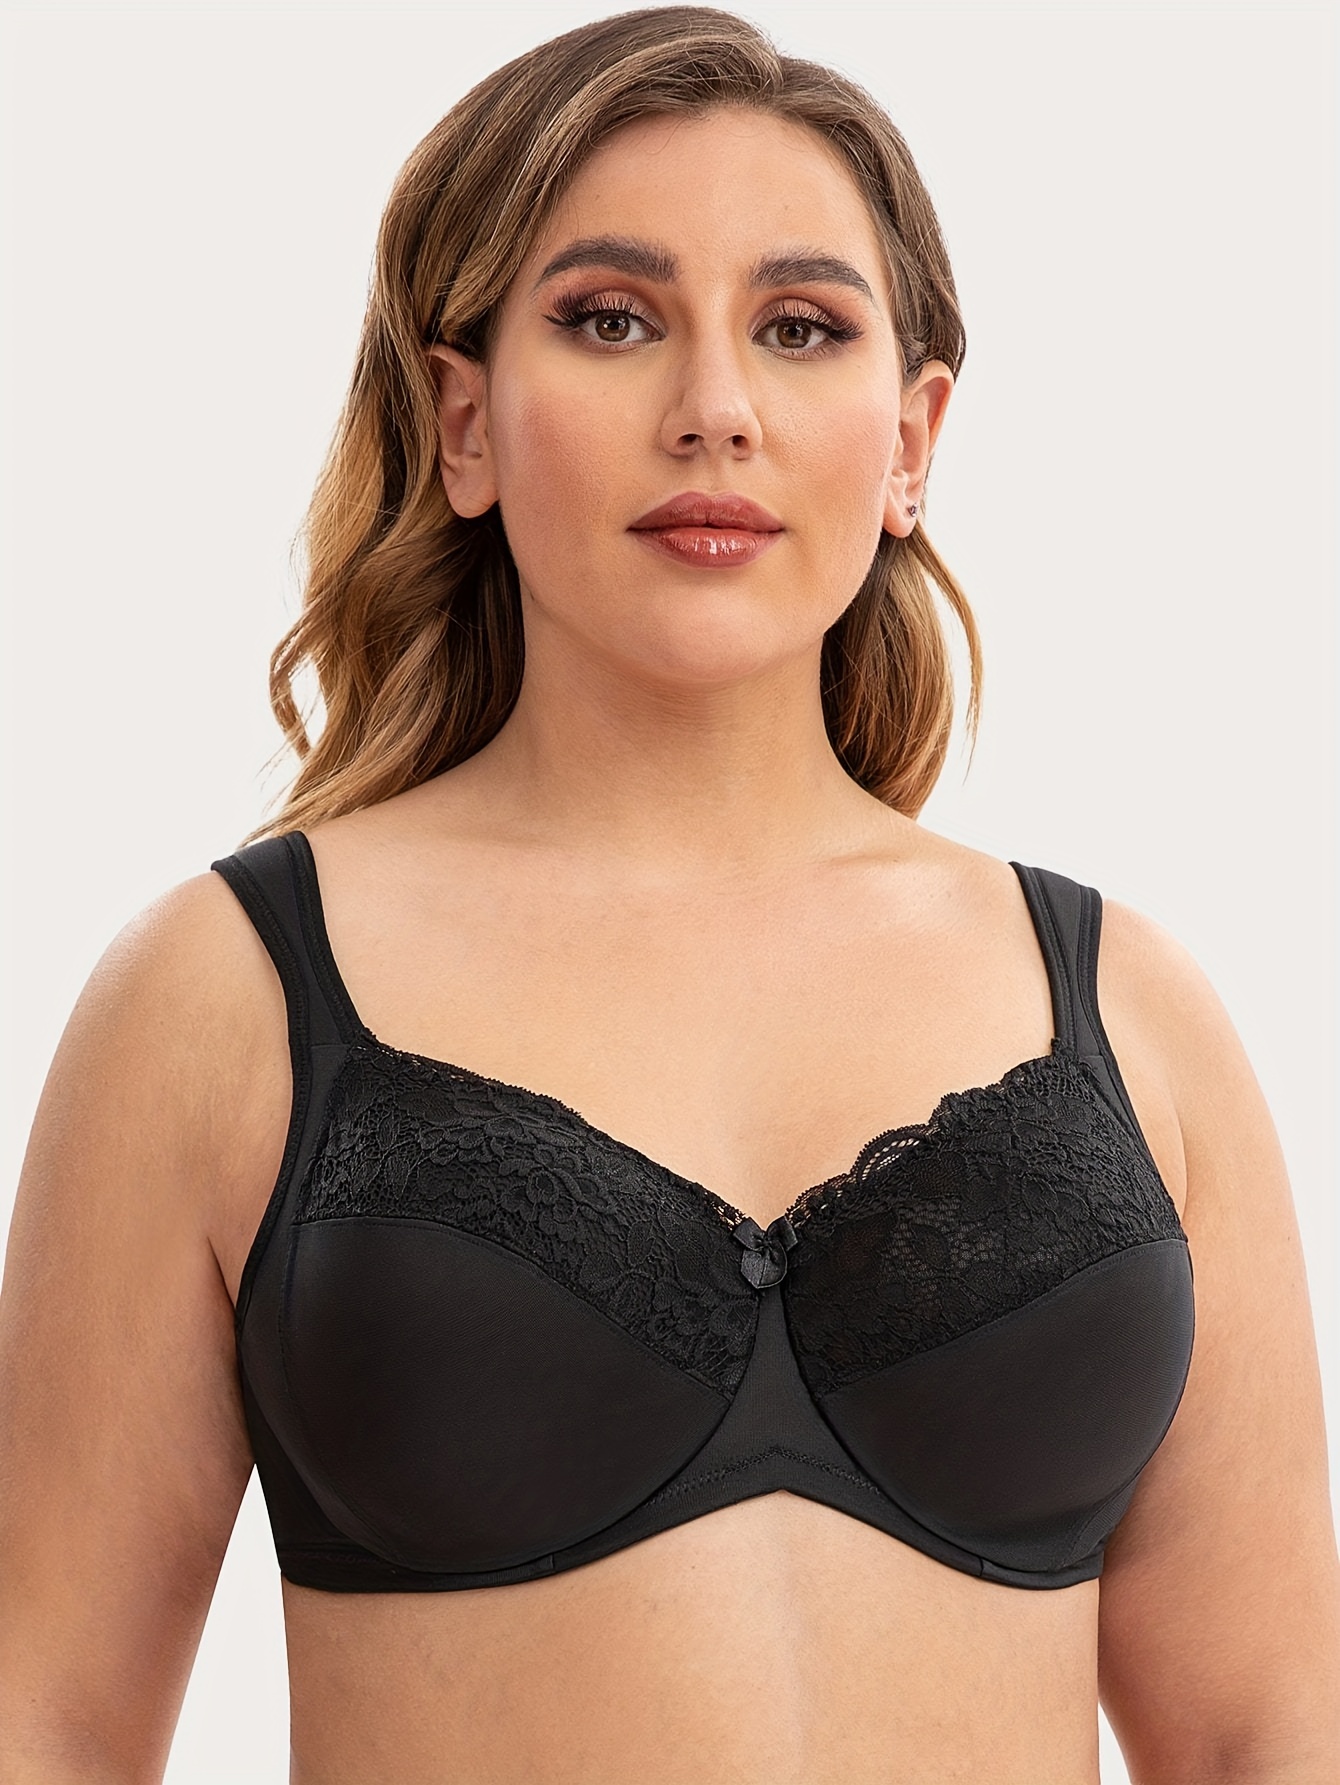 Buy Bralux Plus Size Lace Bra for Women, Non-Padded Non-Wired Bridal Bra -  Camy - Black 32C at